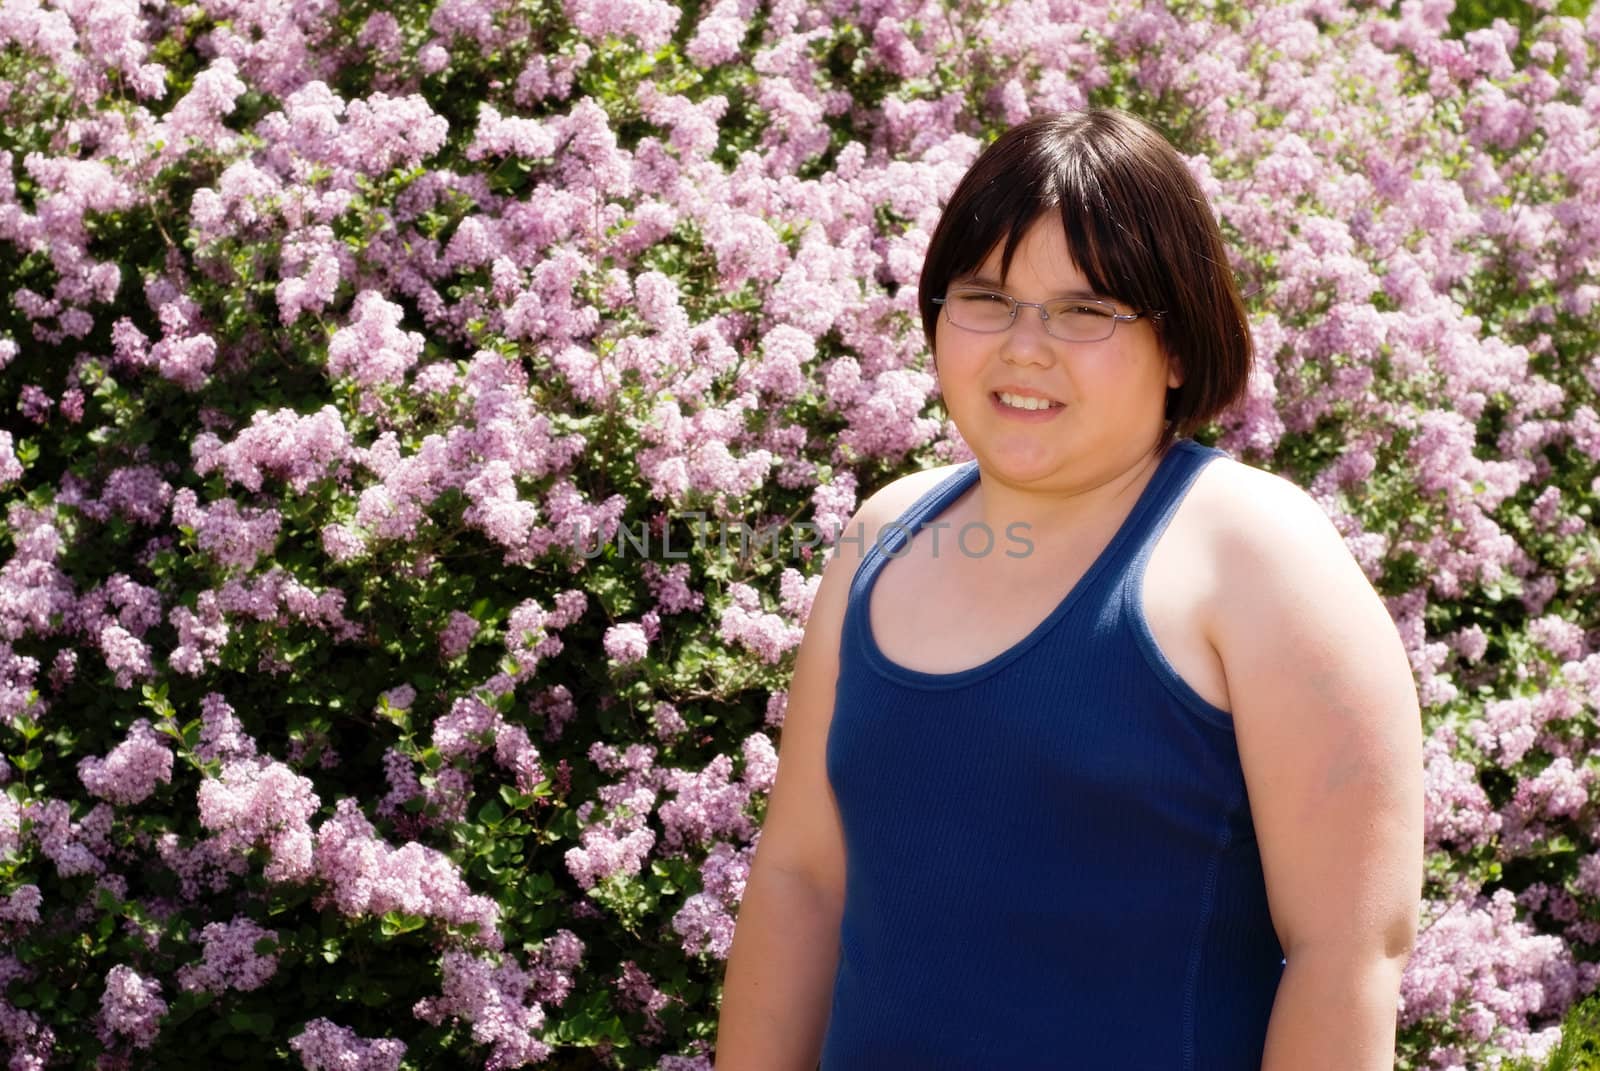 A young girl wearing a tank top standing in front of a blooming lilac bush